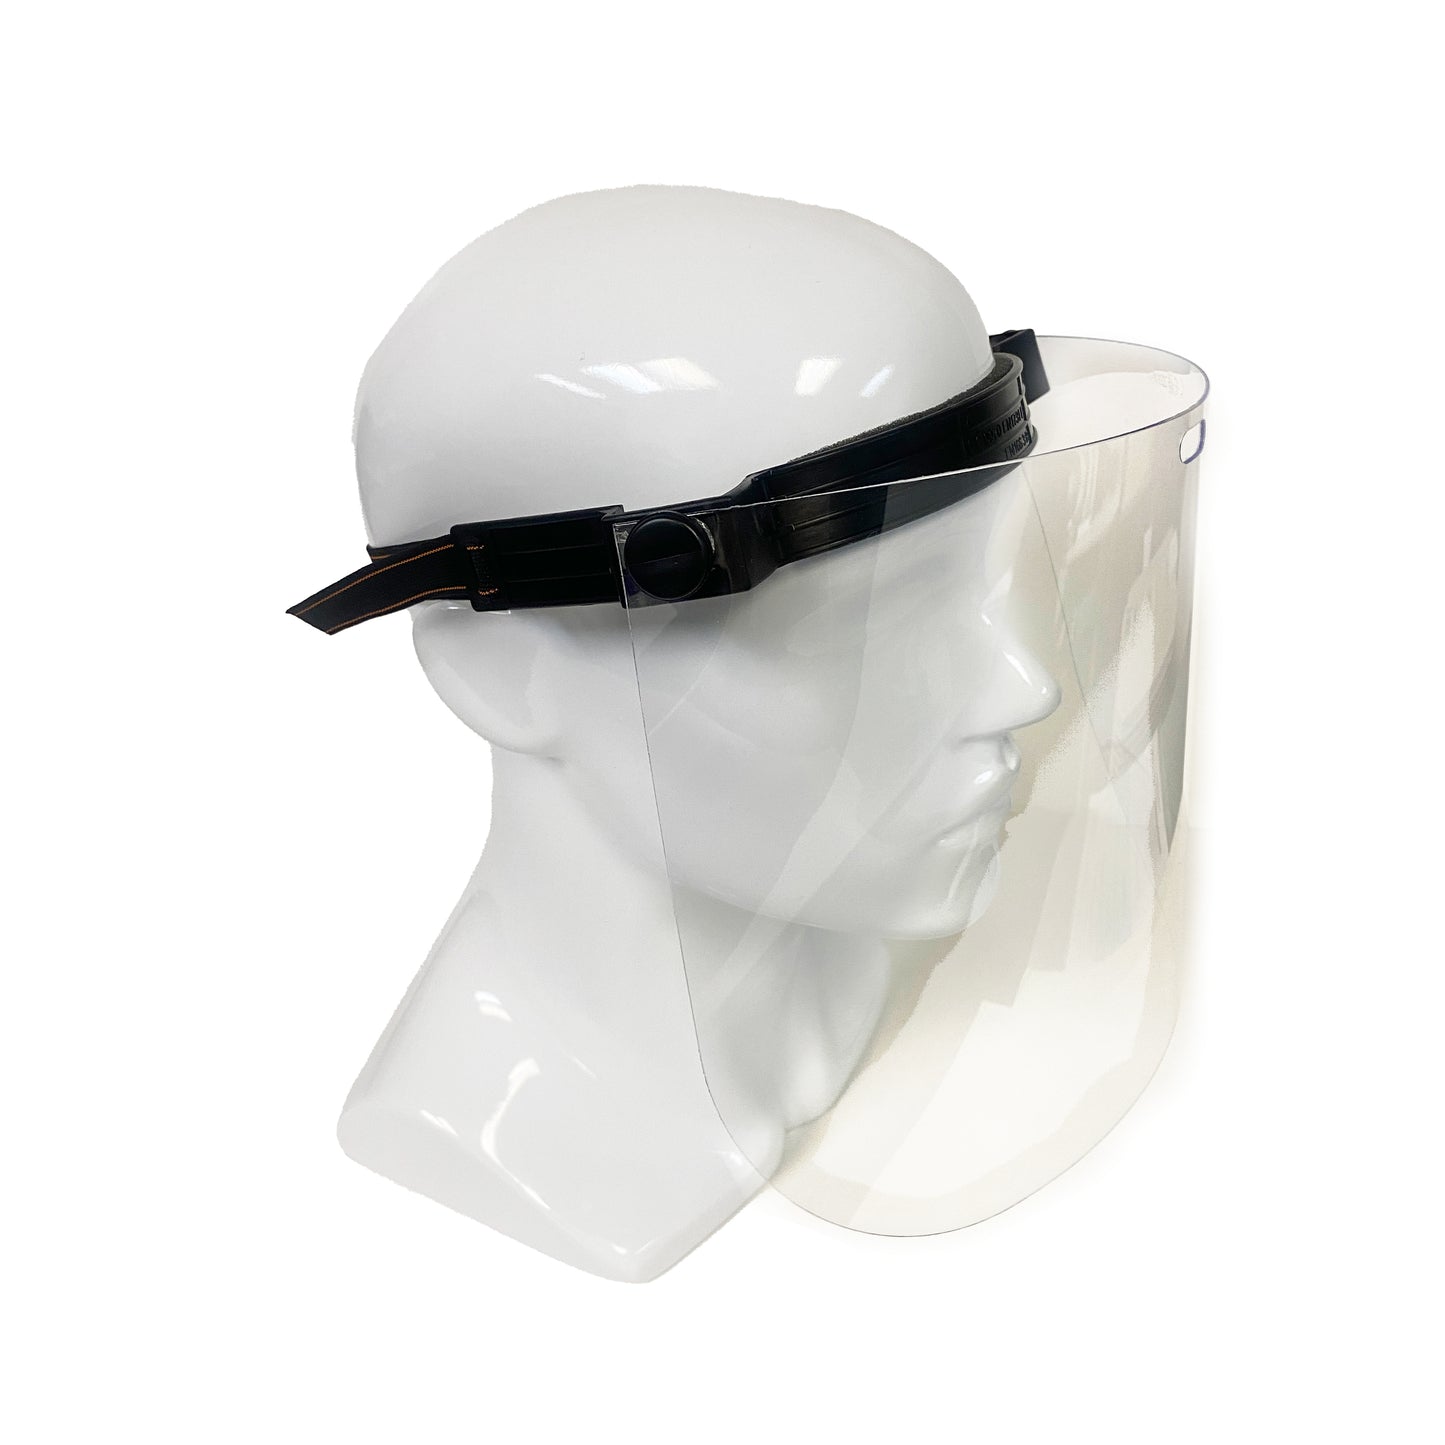 10 Packs of ANSI CE Certified Reusable Flip Up Protective Safety Clear Visor Face Shield with an Adjustable Headband